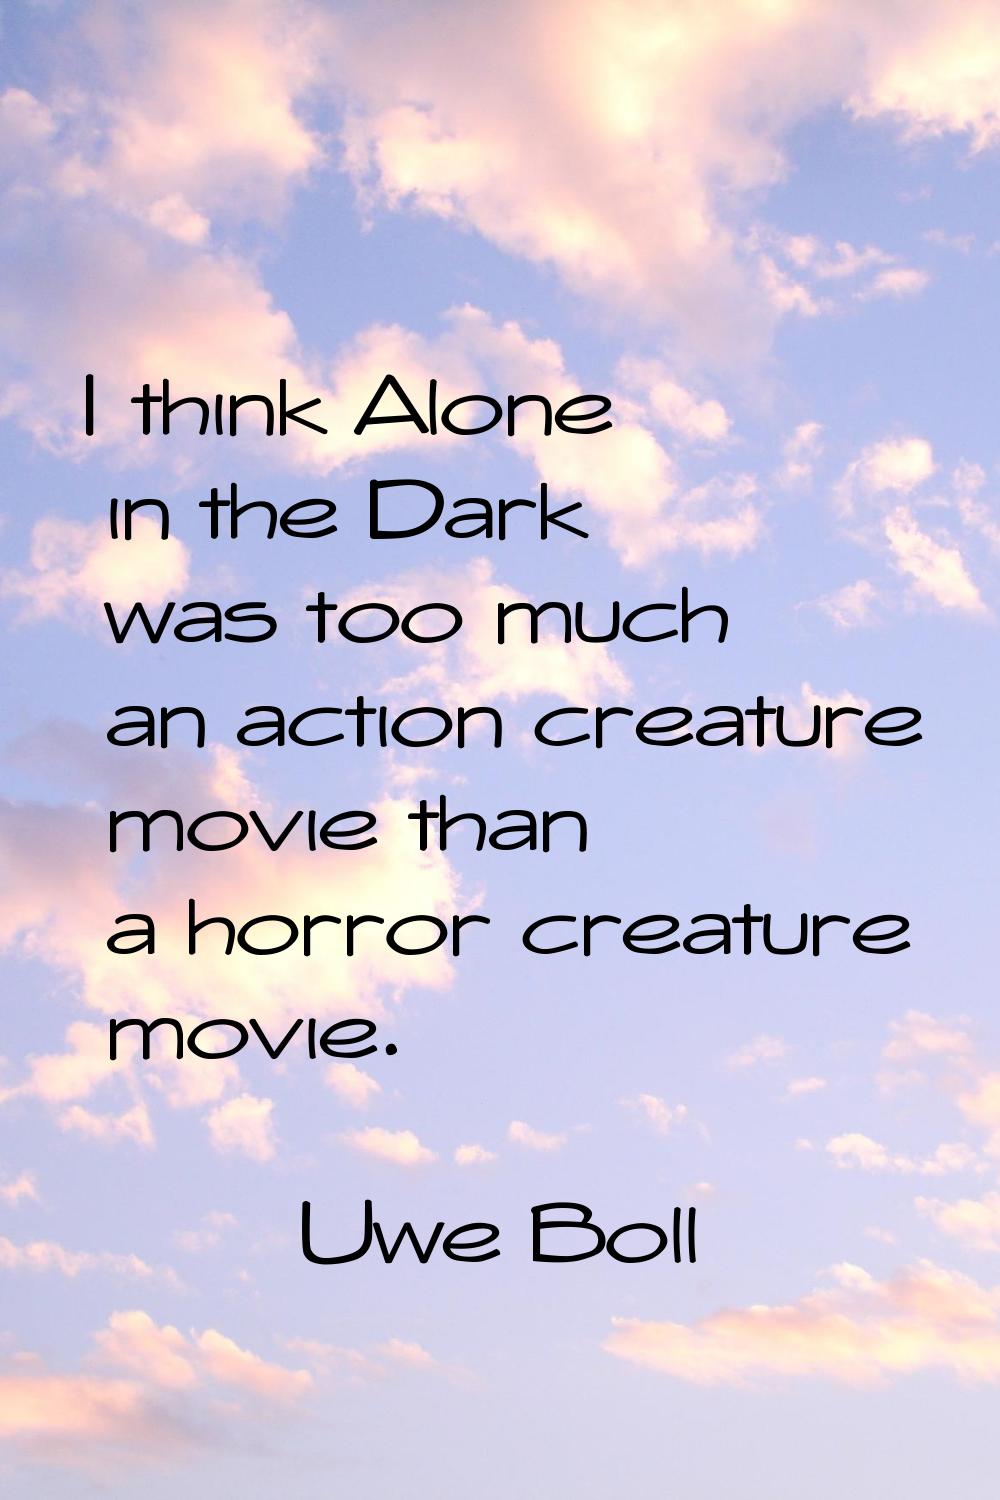 I think Alone in the Dark was too much an action creature movie than a horror creature movie.